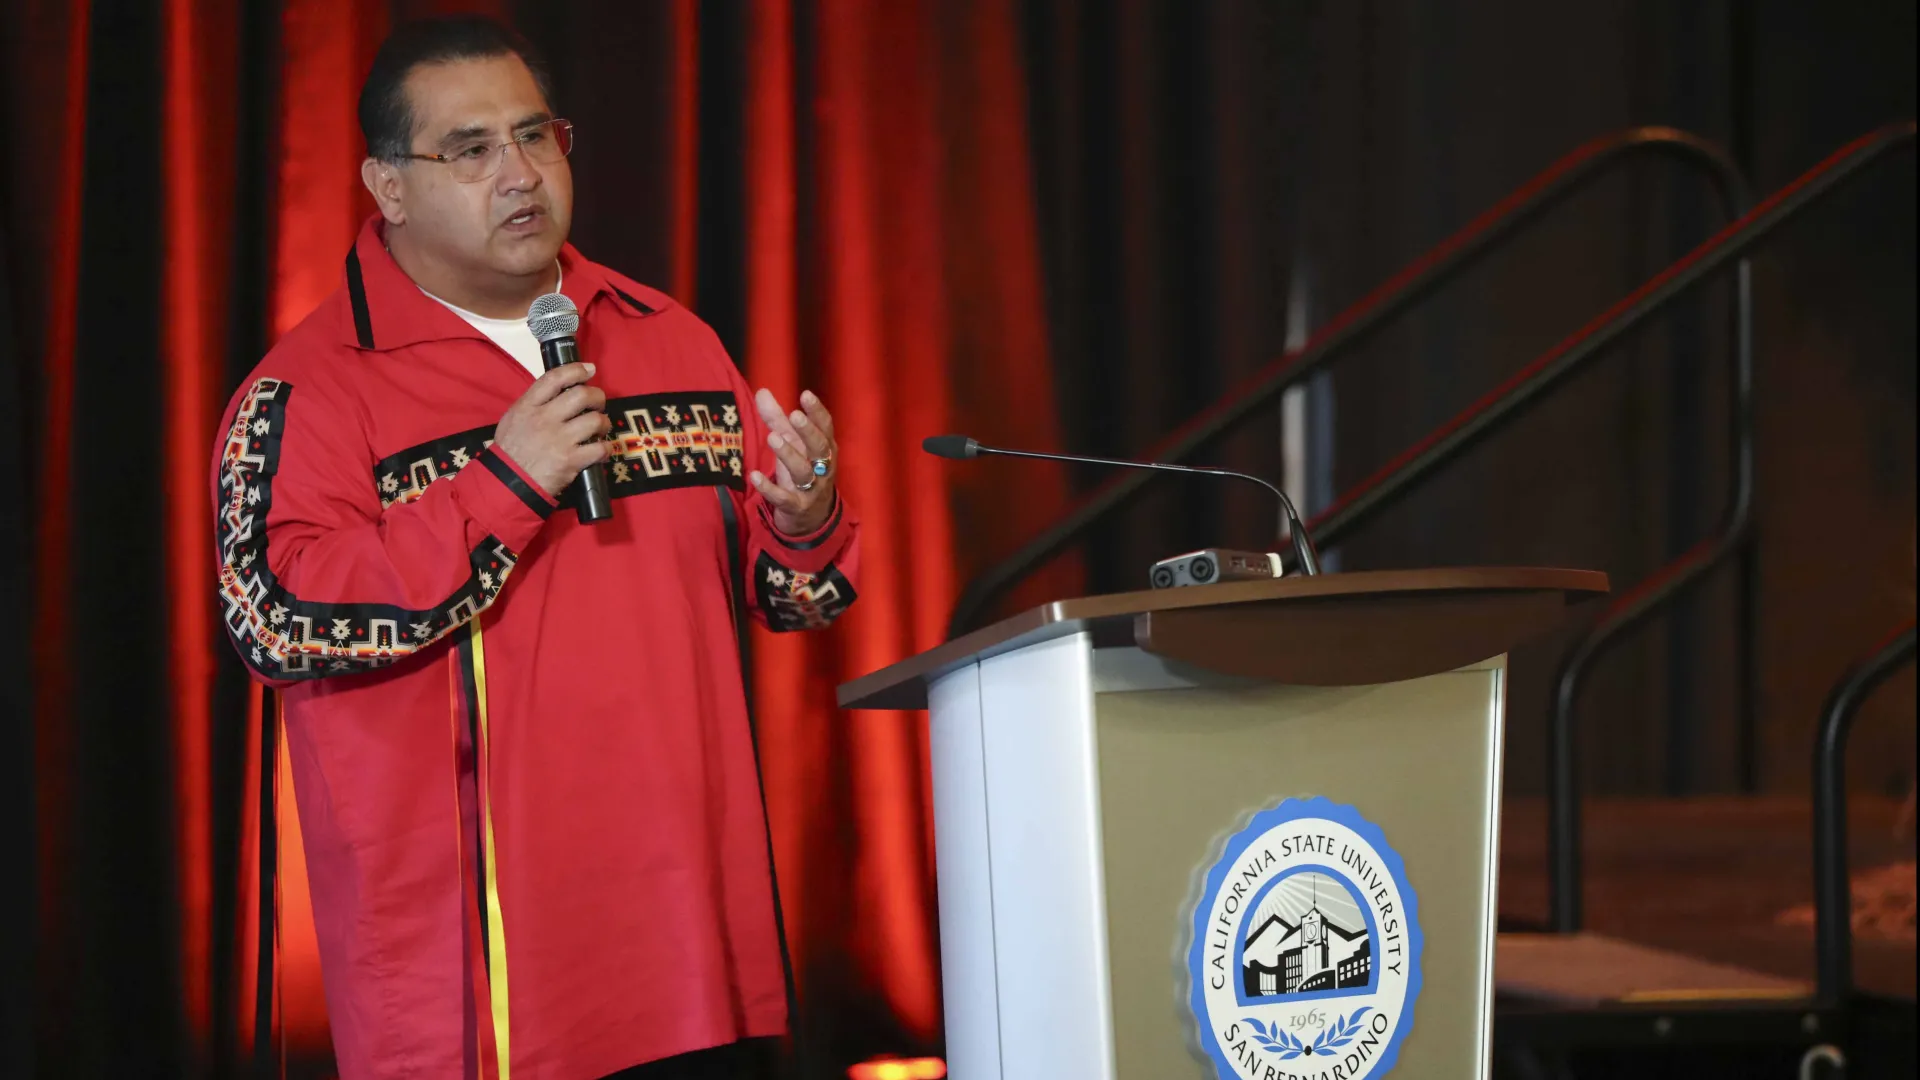 Assemblymember James Ramos, the first California-born Native America elected to the state legislature, gave the keynote address and opening prayer.